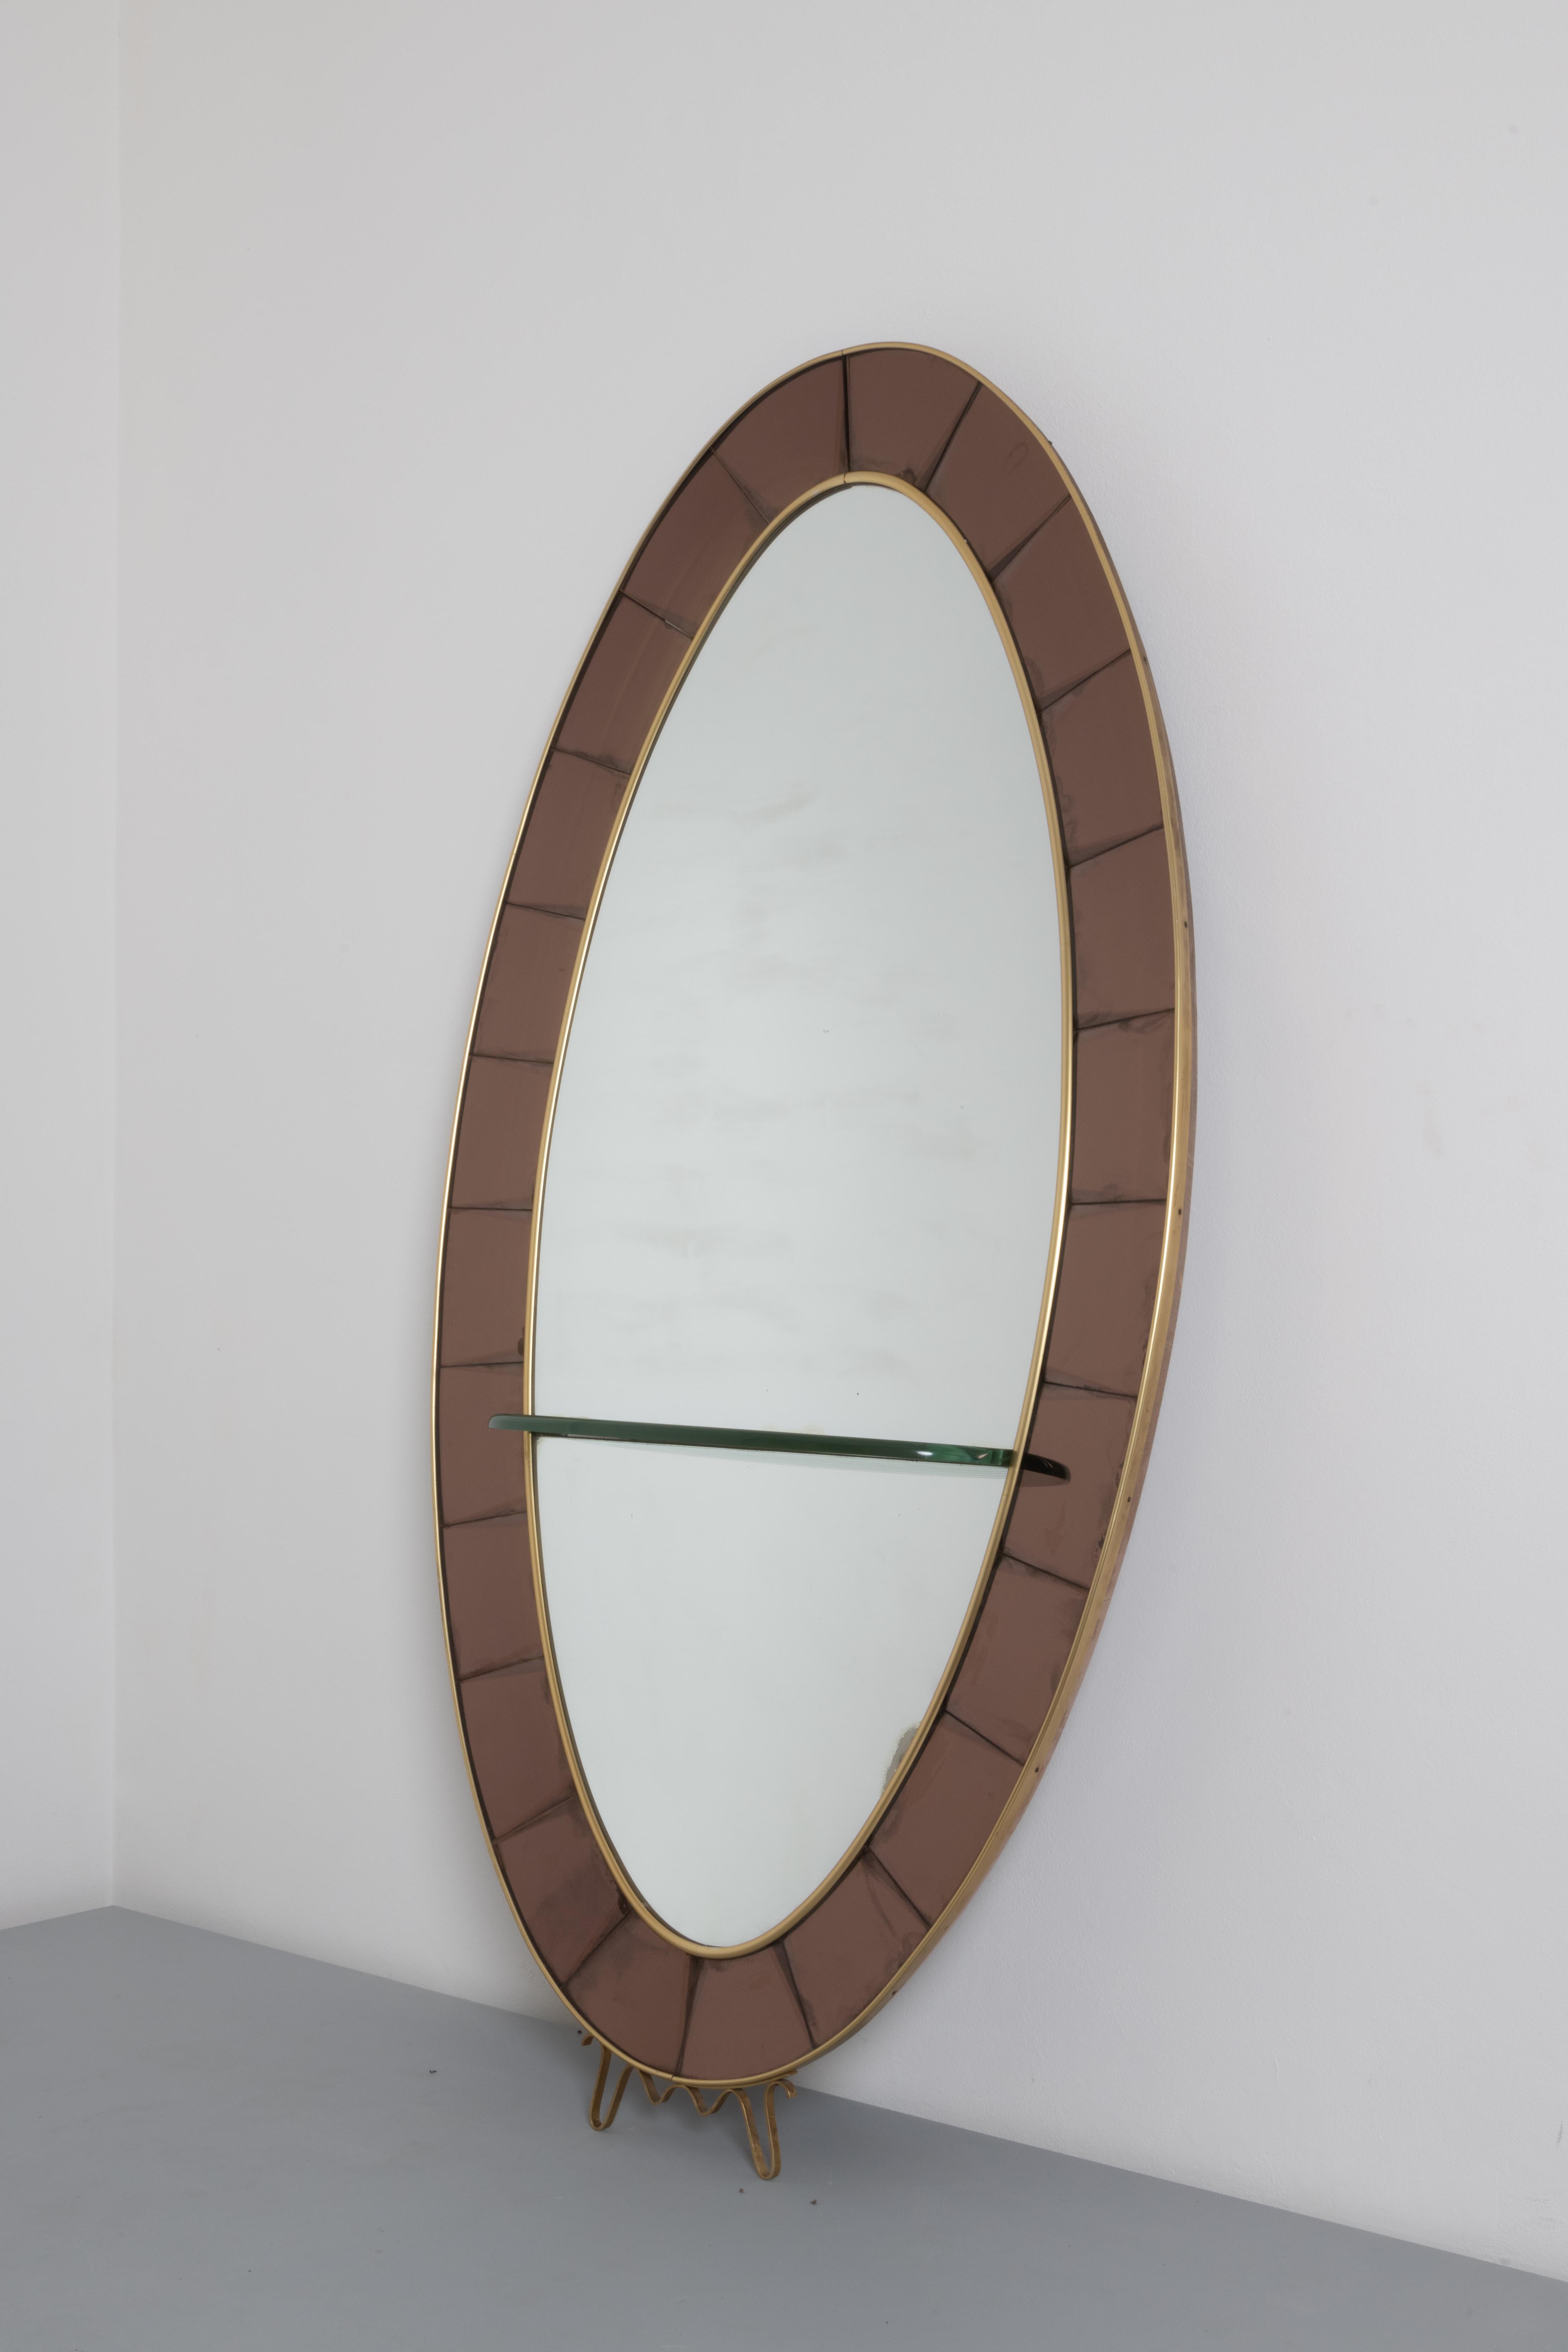 Italian Cristal Art, c. 1950. Mirror with console table. 